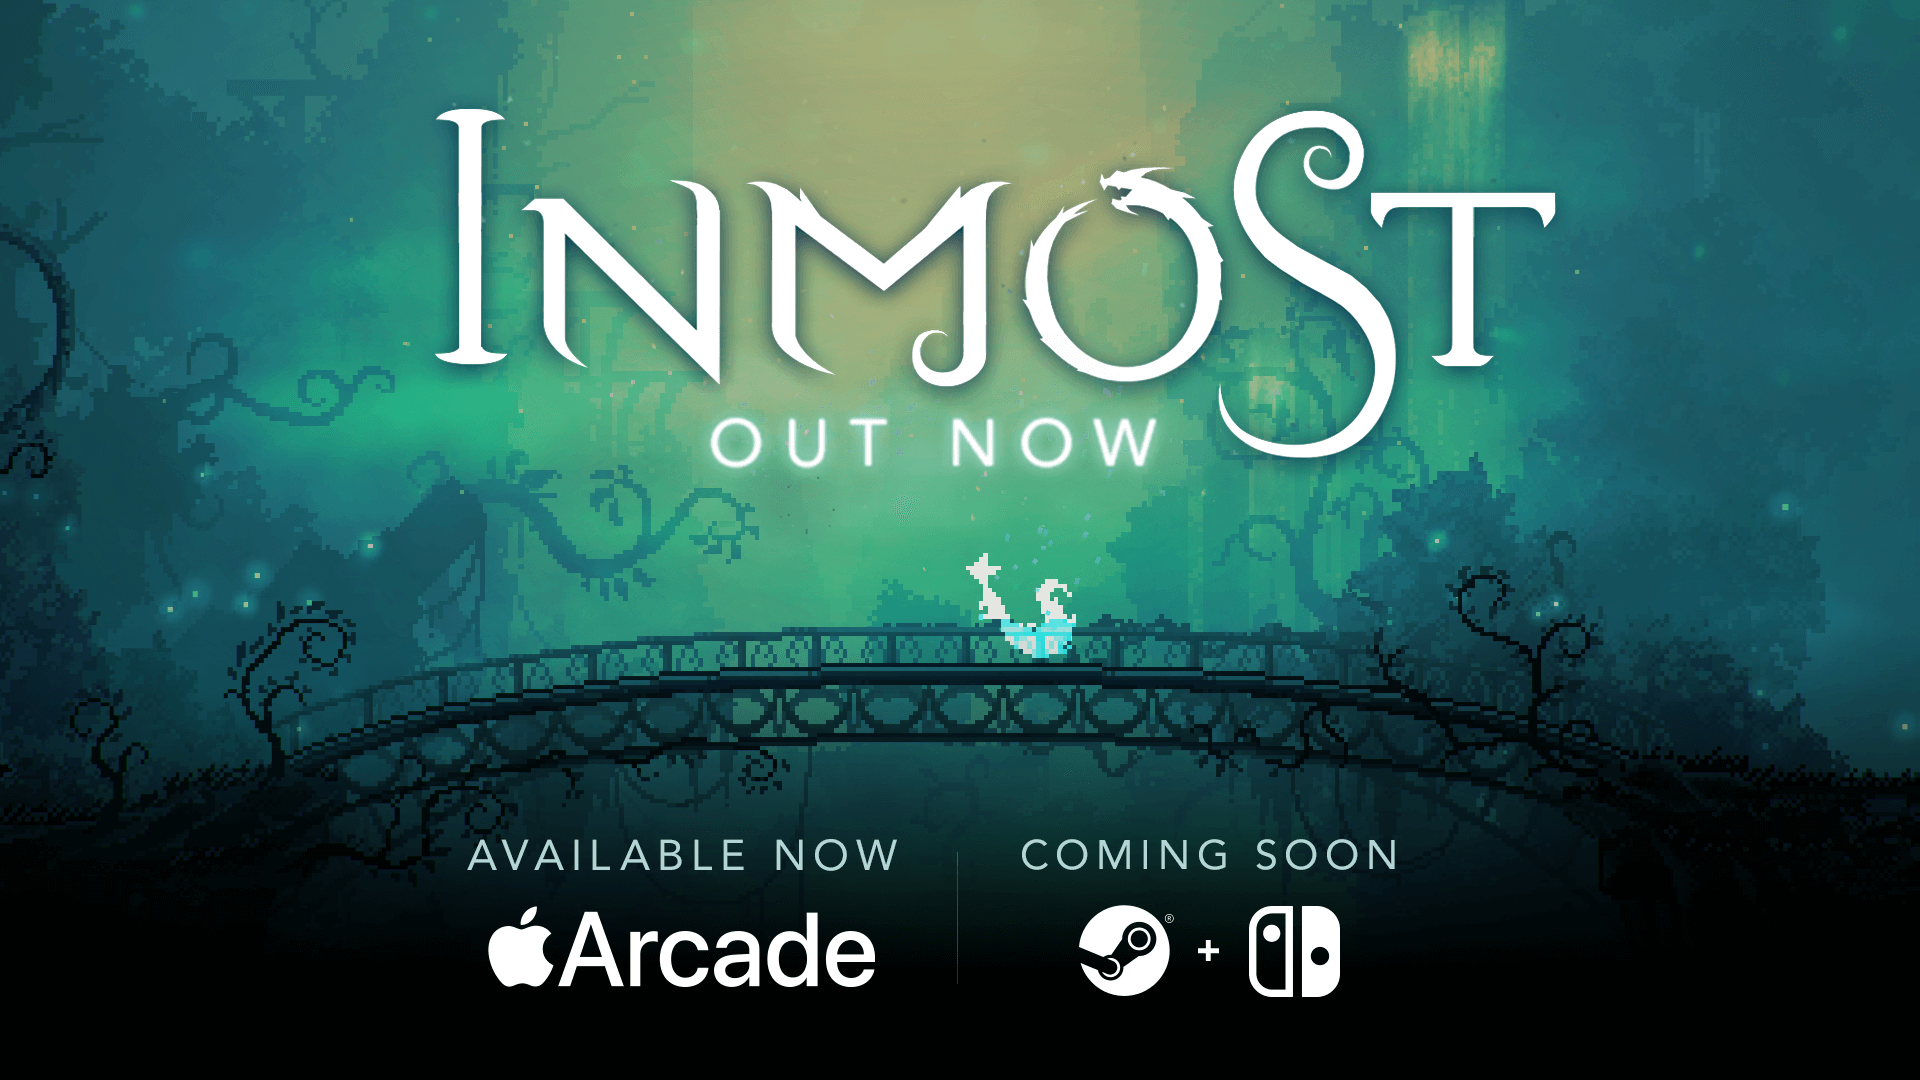 inmost reviews